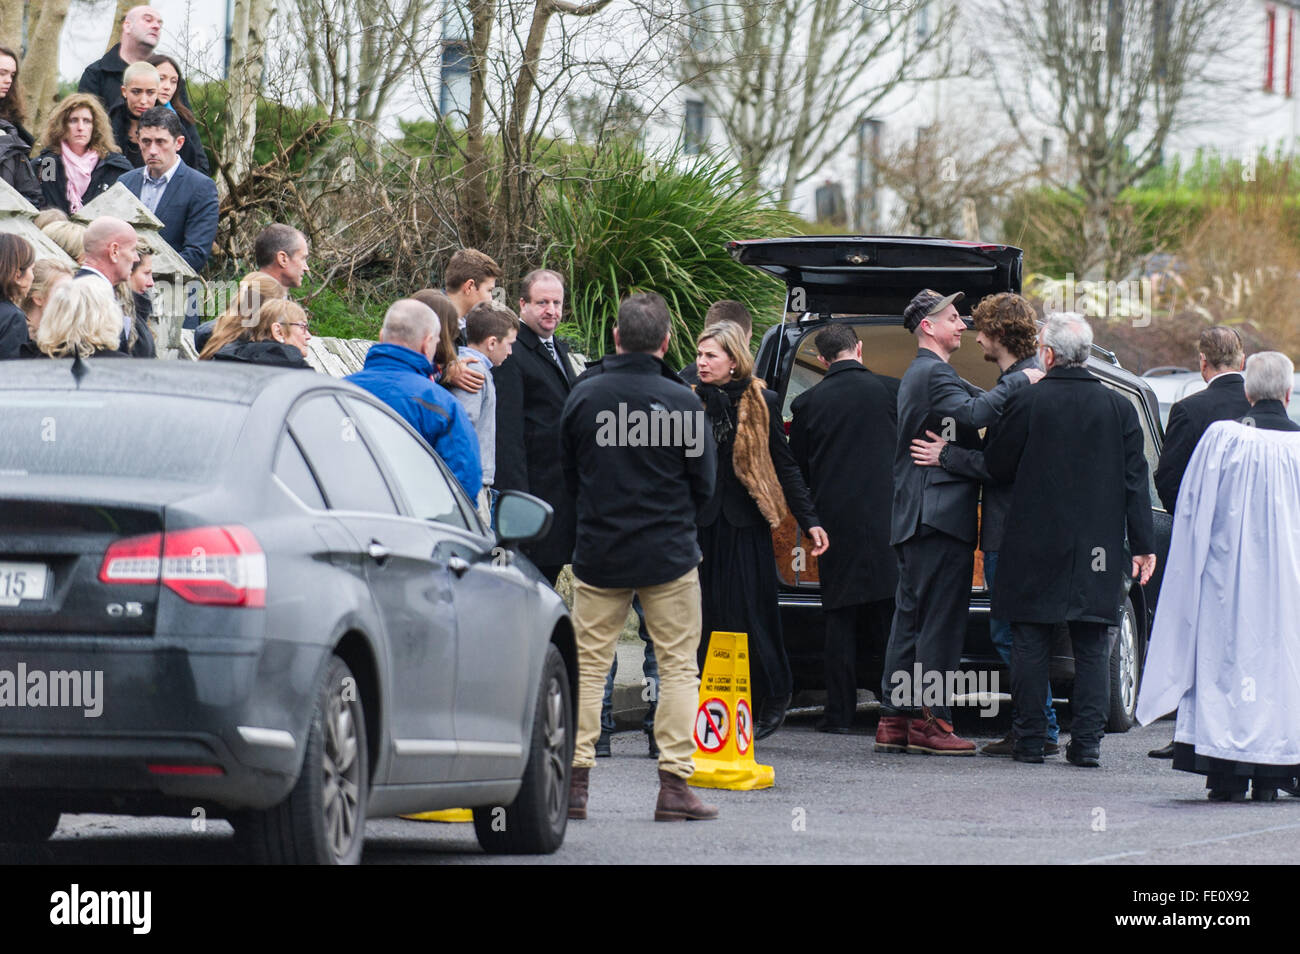 Schull, Ireland. 3rd February, 2016. The mourners console each other as Colin Vearncombe's coffin waits to be carried to St Mary's Church, Schull before leaving for cremation on 4th February, 2016. Credit: Andy Gibson/Alamy Live News. Stock Photo